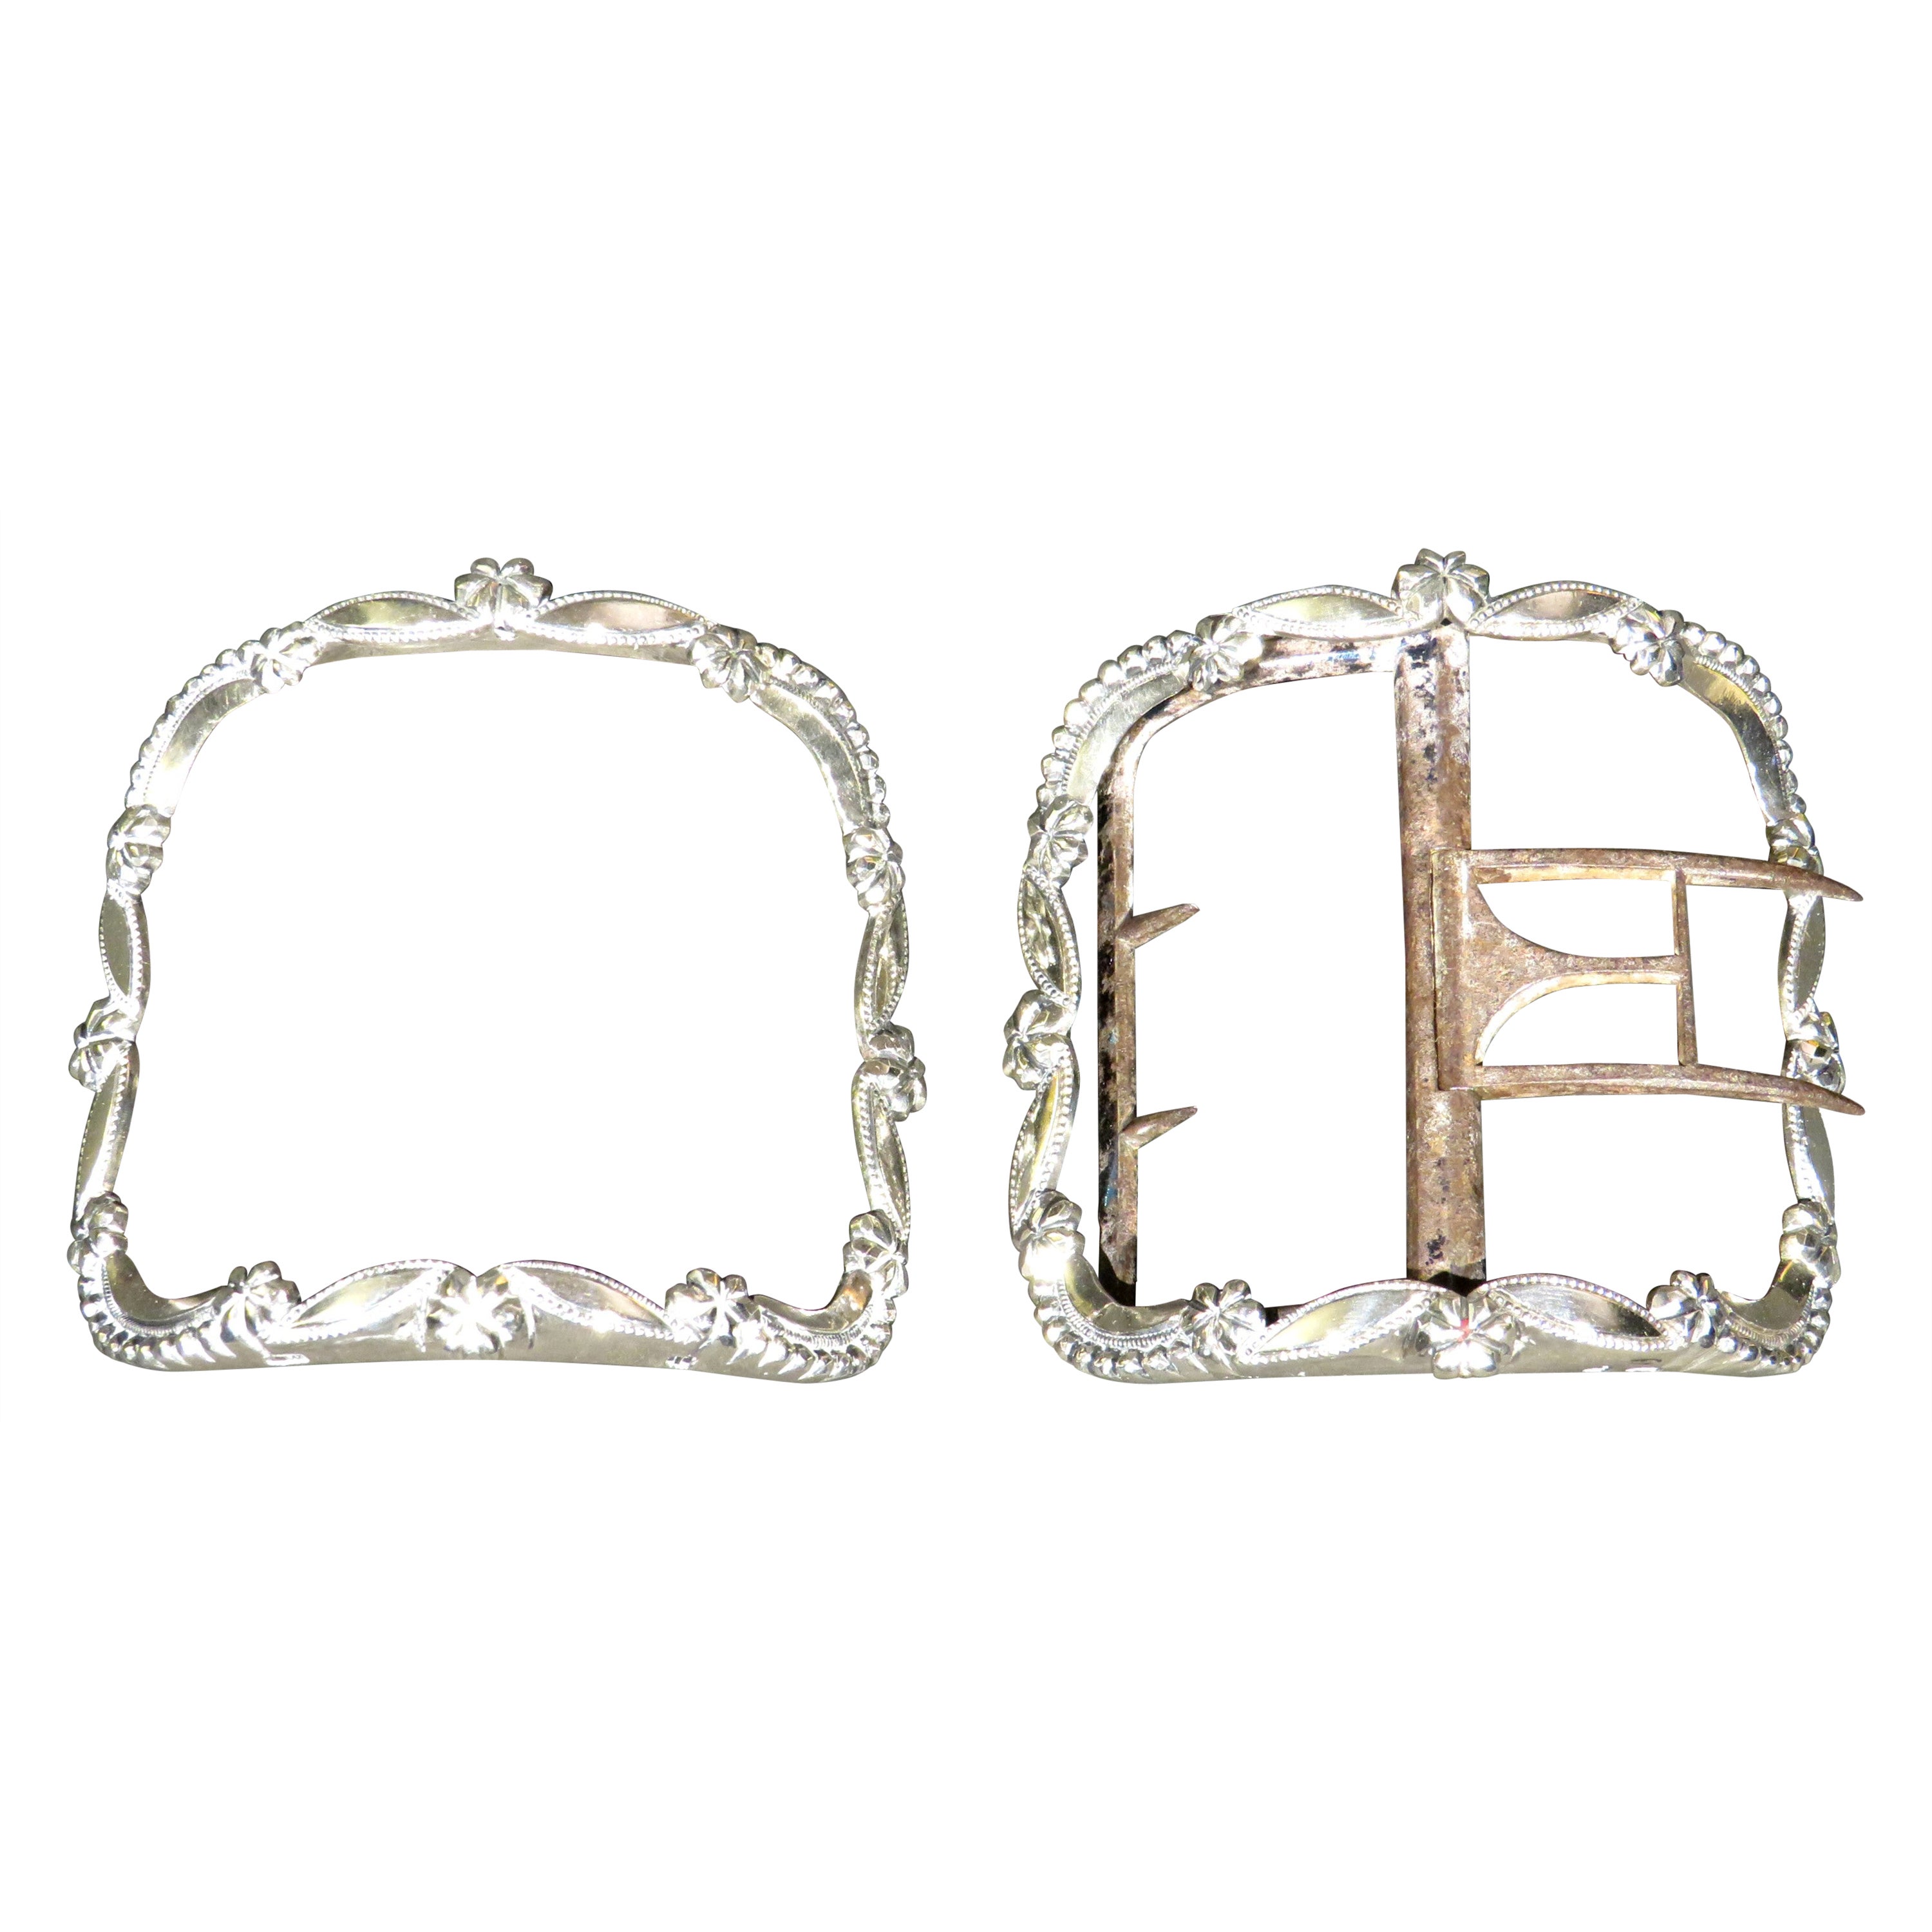 Fine Pair of 18th Century George III Sterling Silver Shoe Buckles, London 1792 For Sale